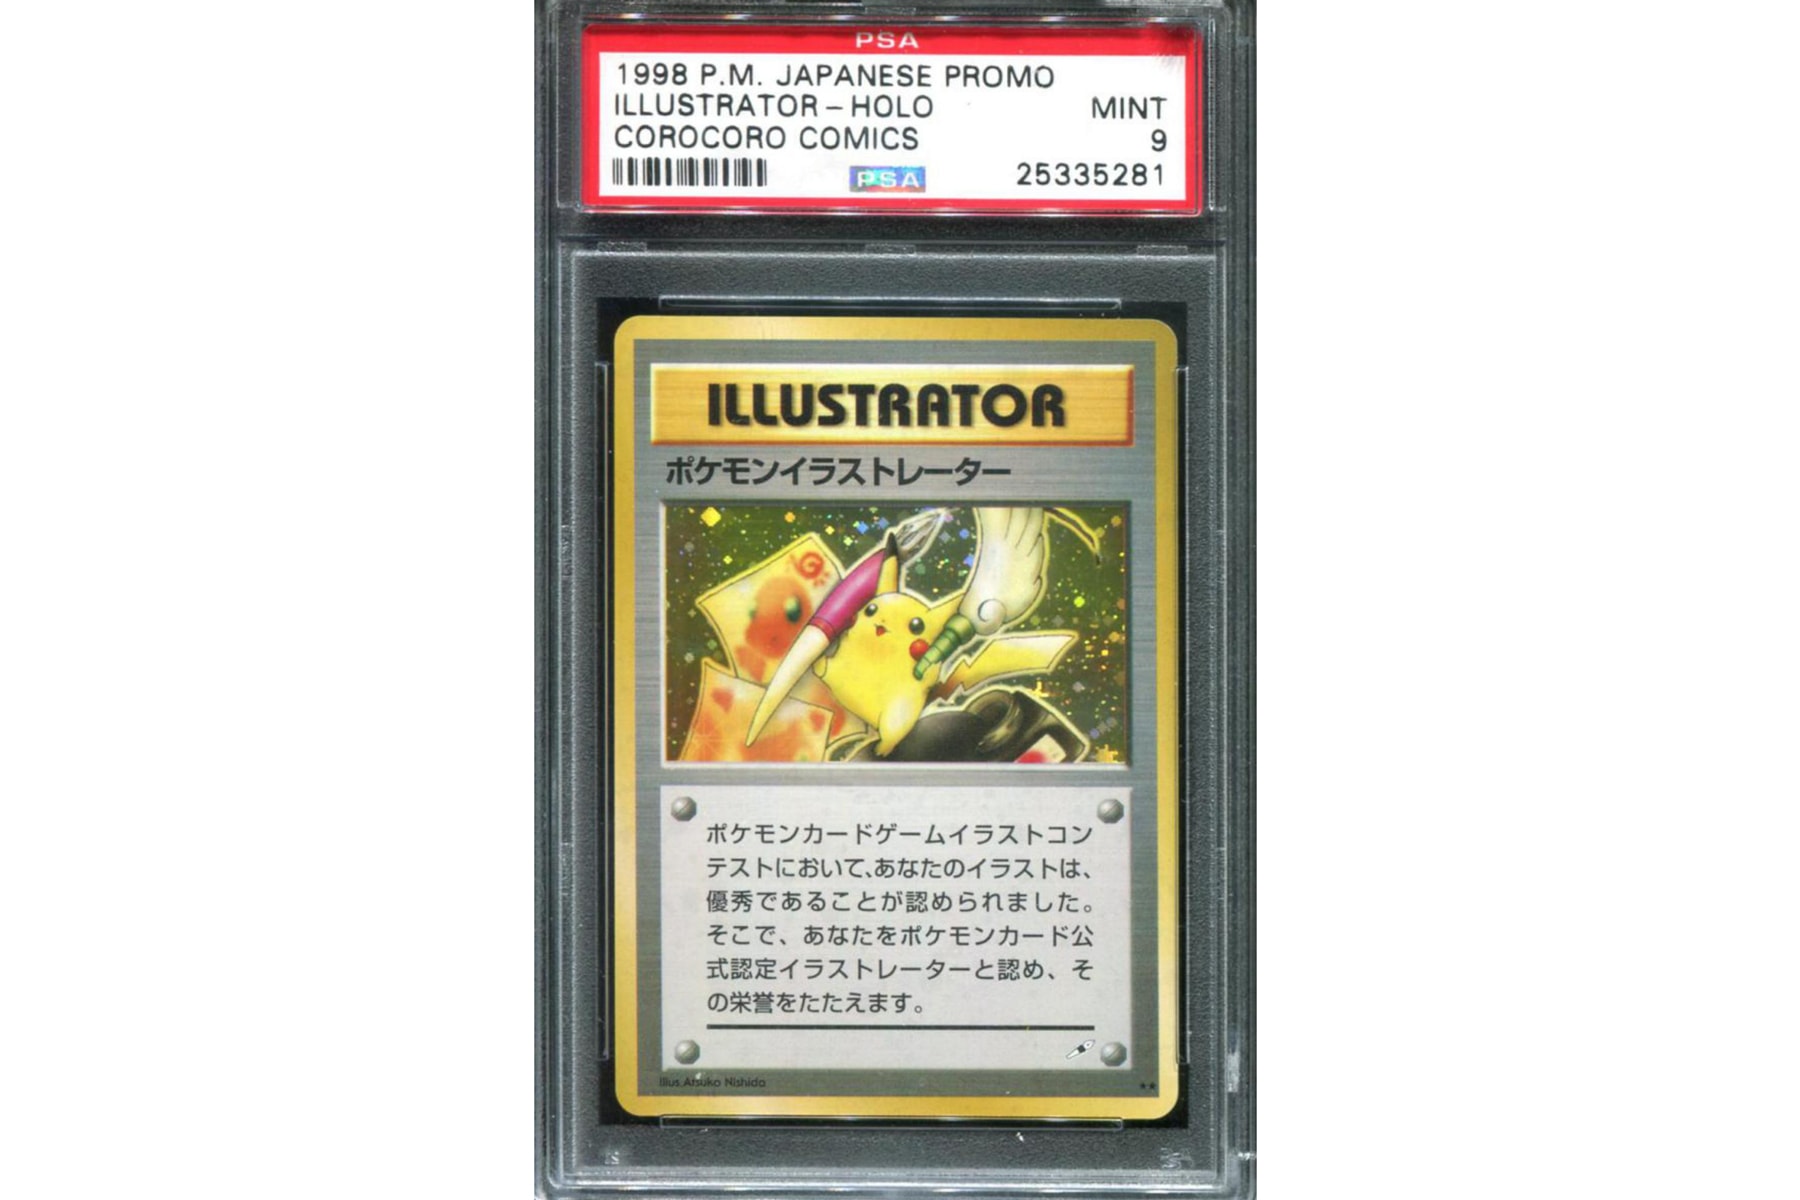 For $100,000, You Can Have the Most Valuable Pokemon Card Ever